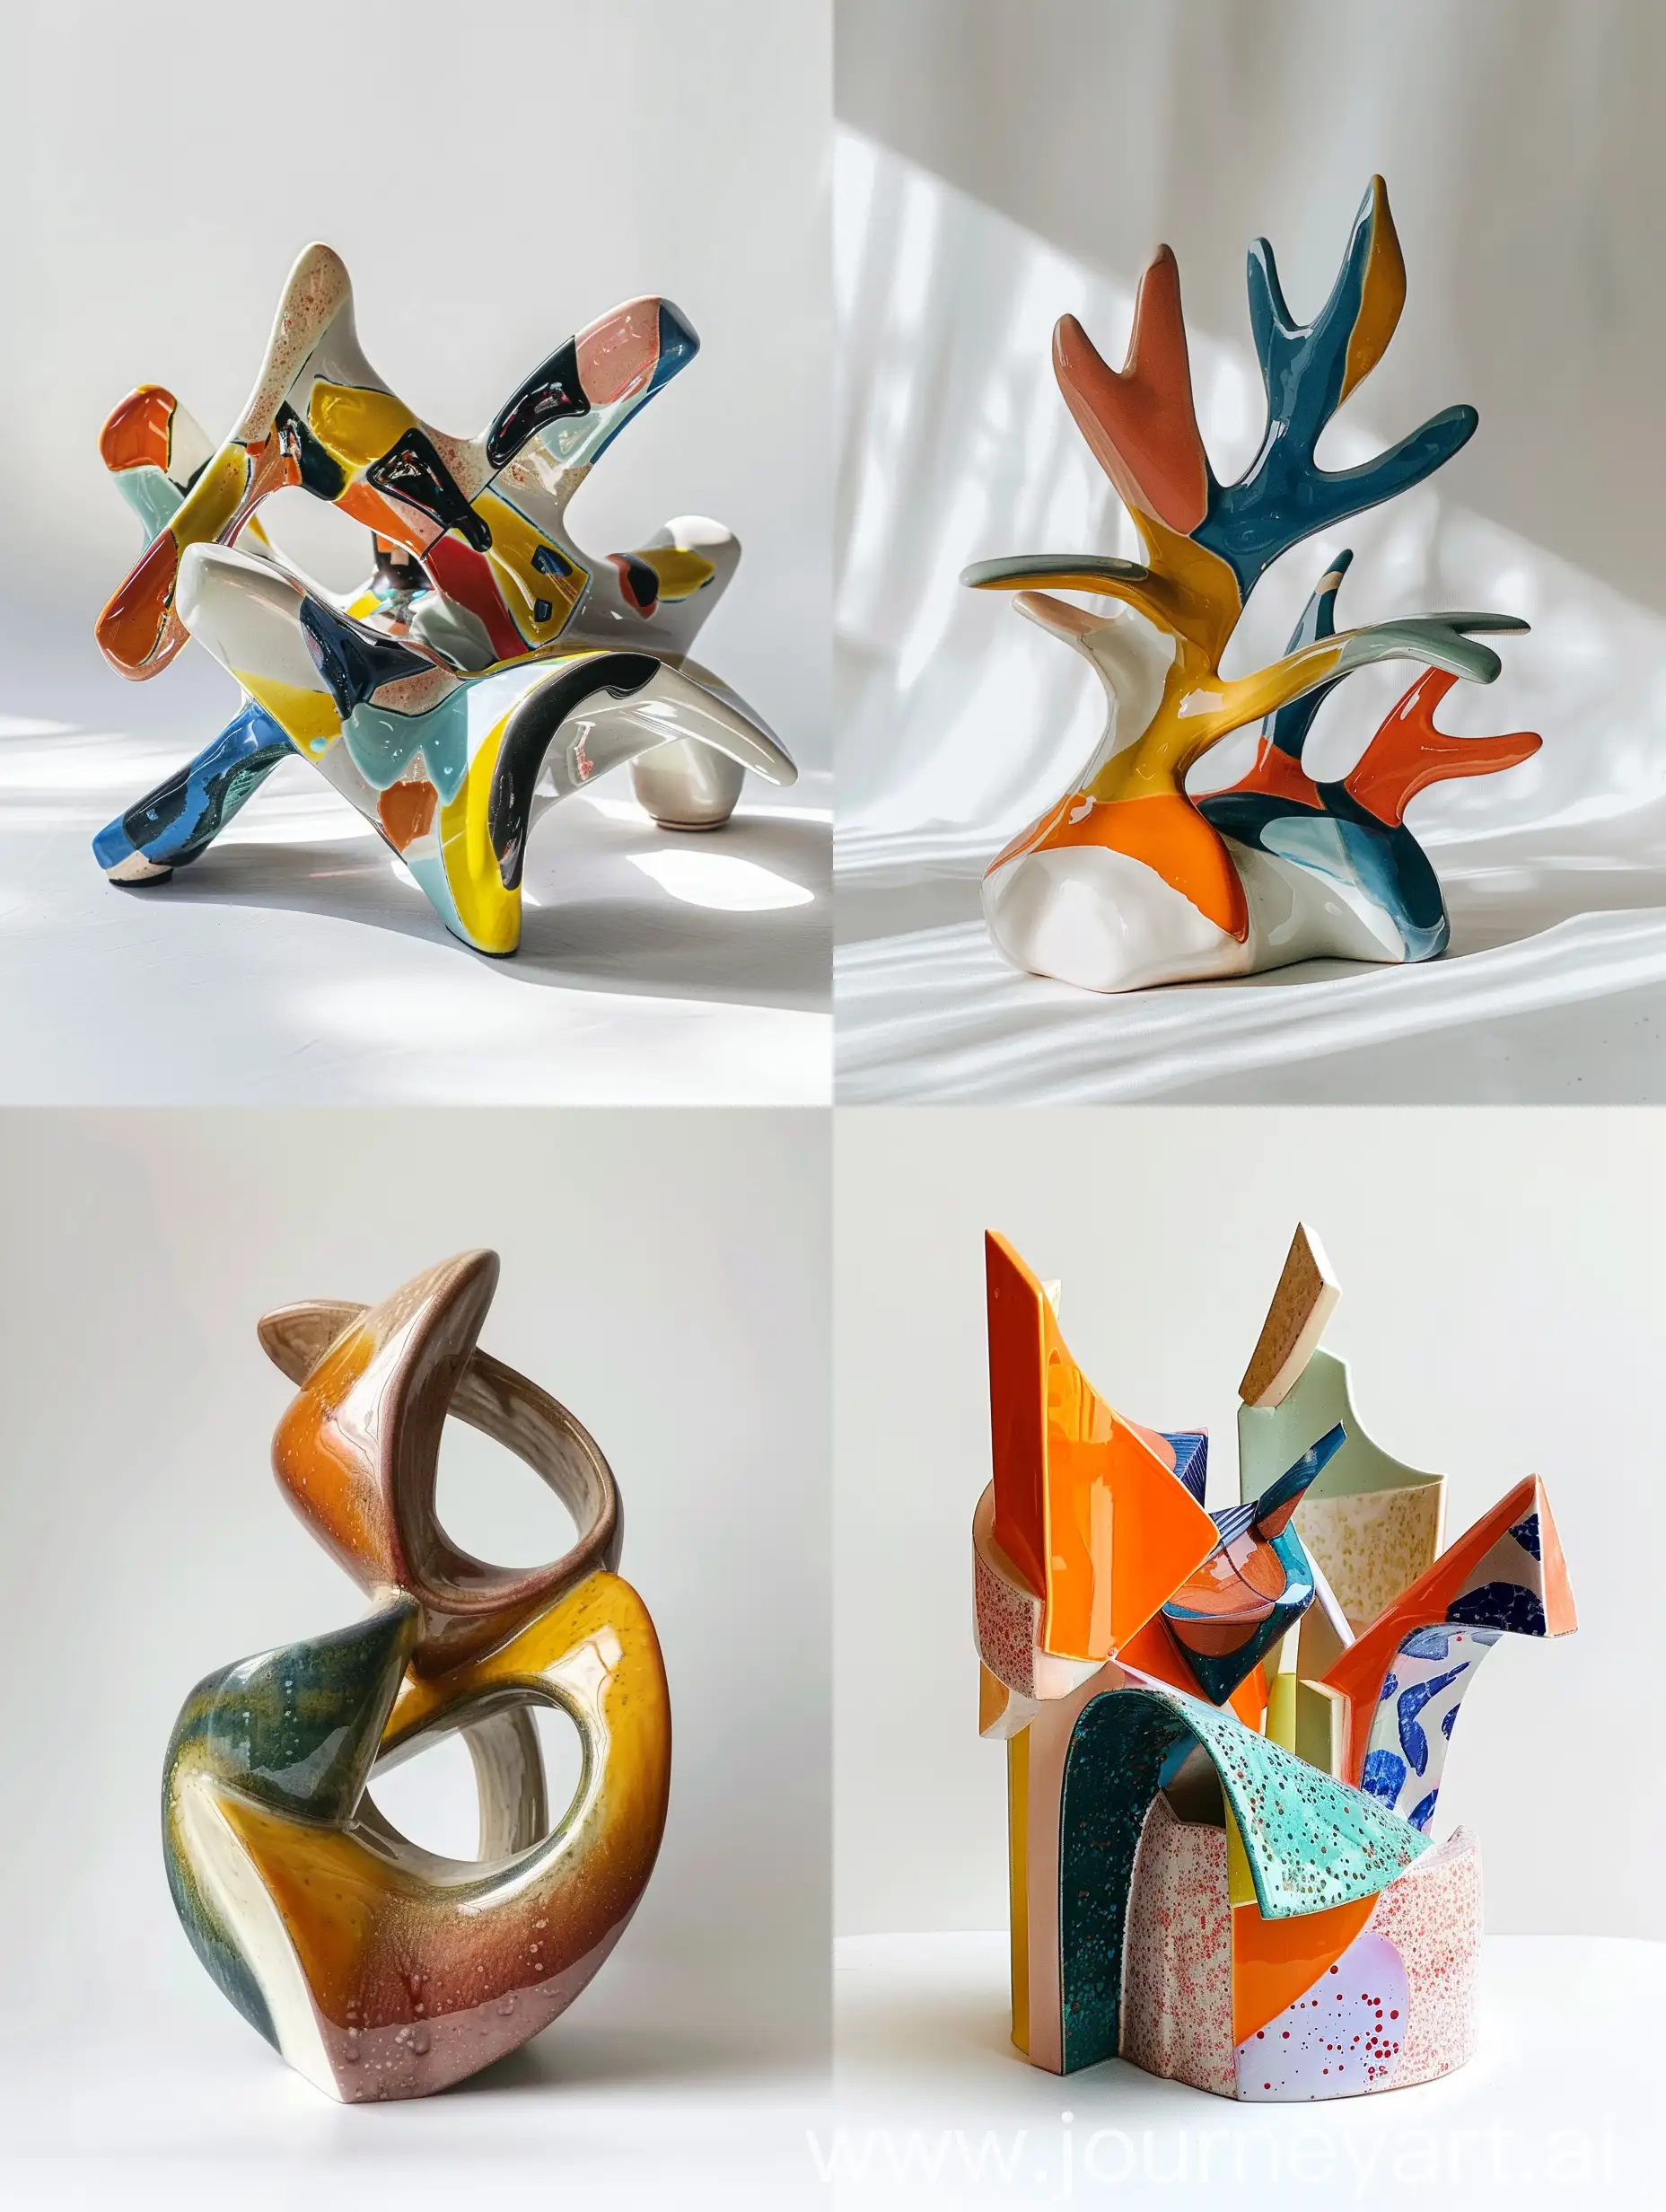 Expressive-Ceramic-Abstract-Sculpture-in-Scandinavian-Style-Retro-60s-Cubism-and-Suprematism